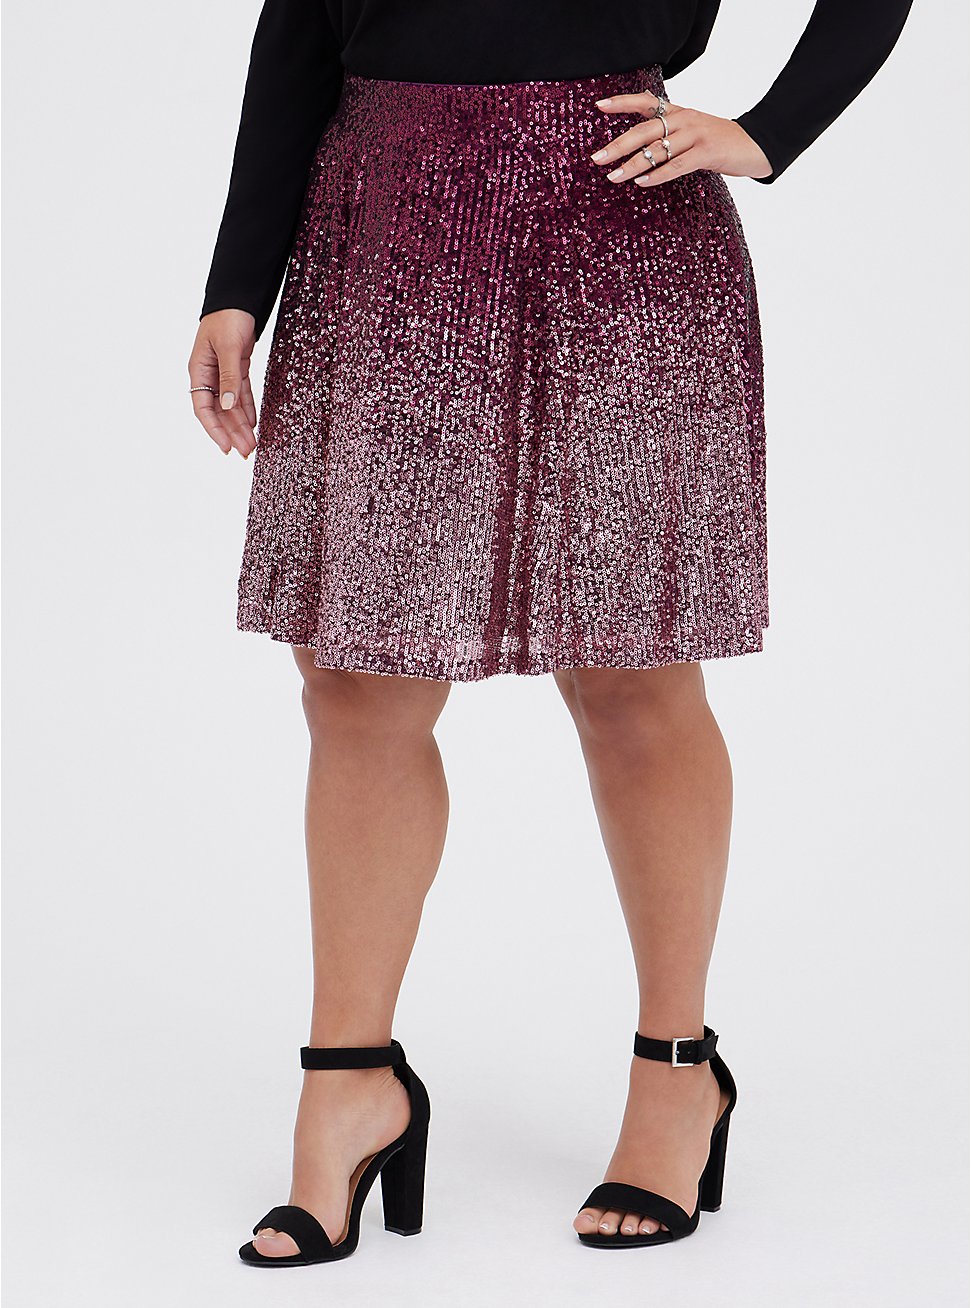 Sequin Pleated Mini Skirt - Ombre Burgundy & Pink , MULTI, hi-res